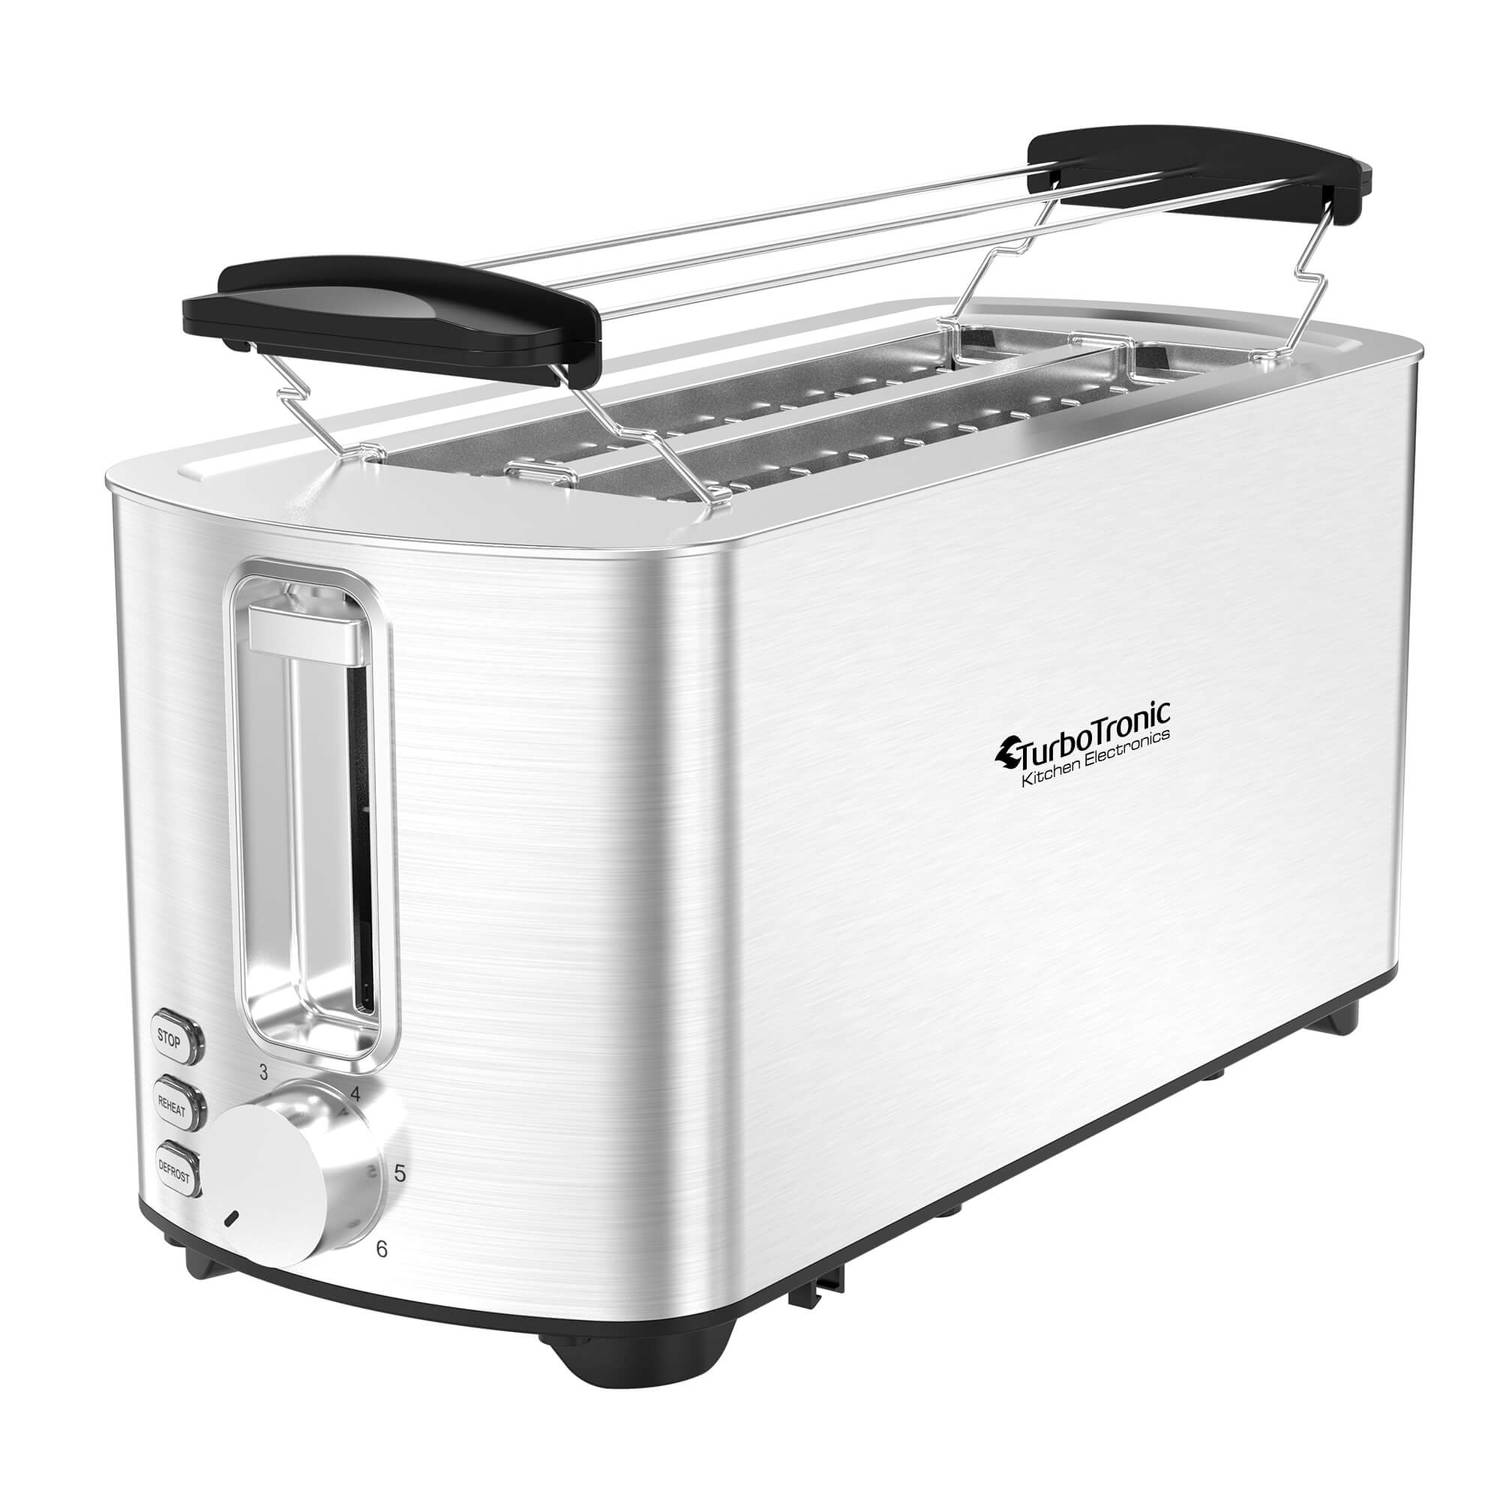 TurboTronic BF13 Broodrooster - Toaster - 4 Boterhammen - RVS